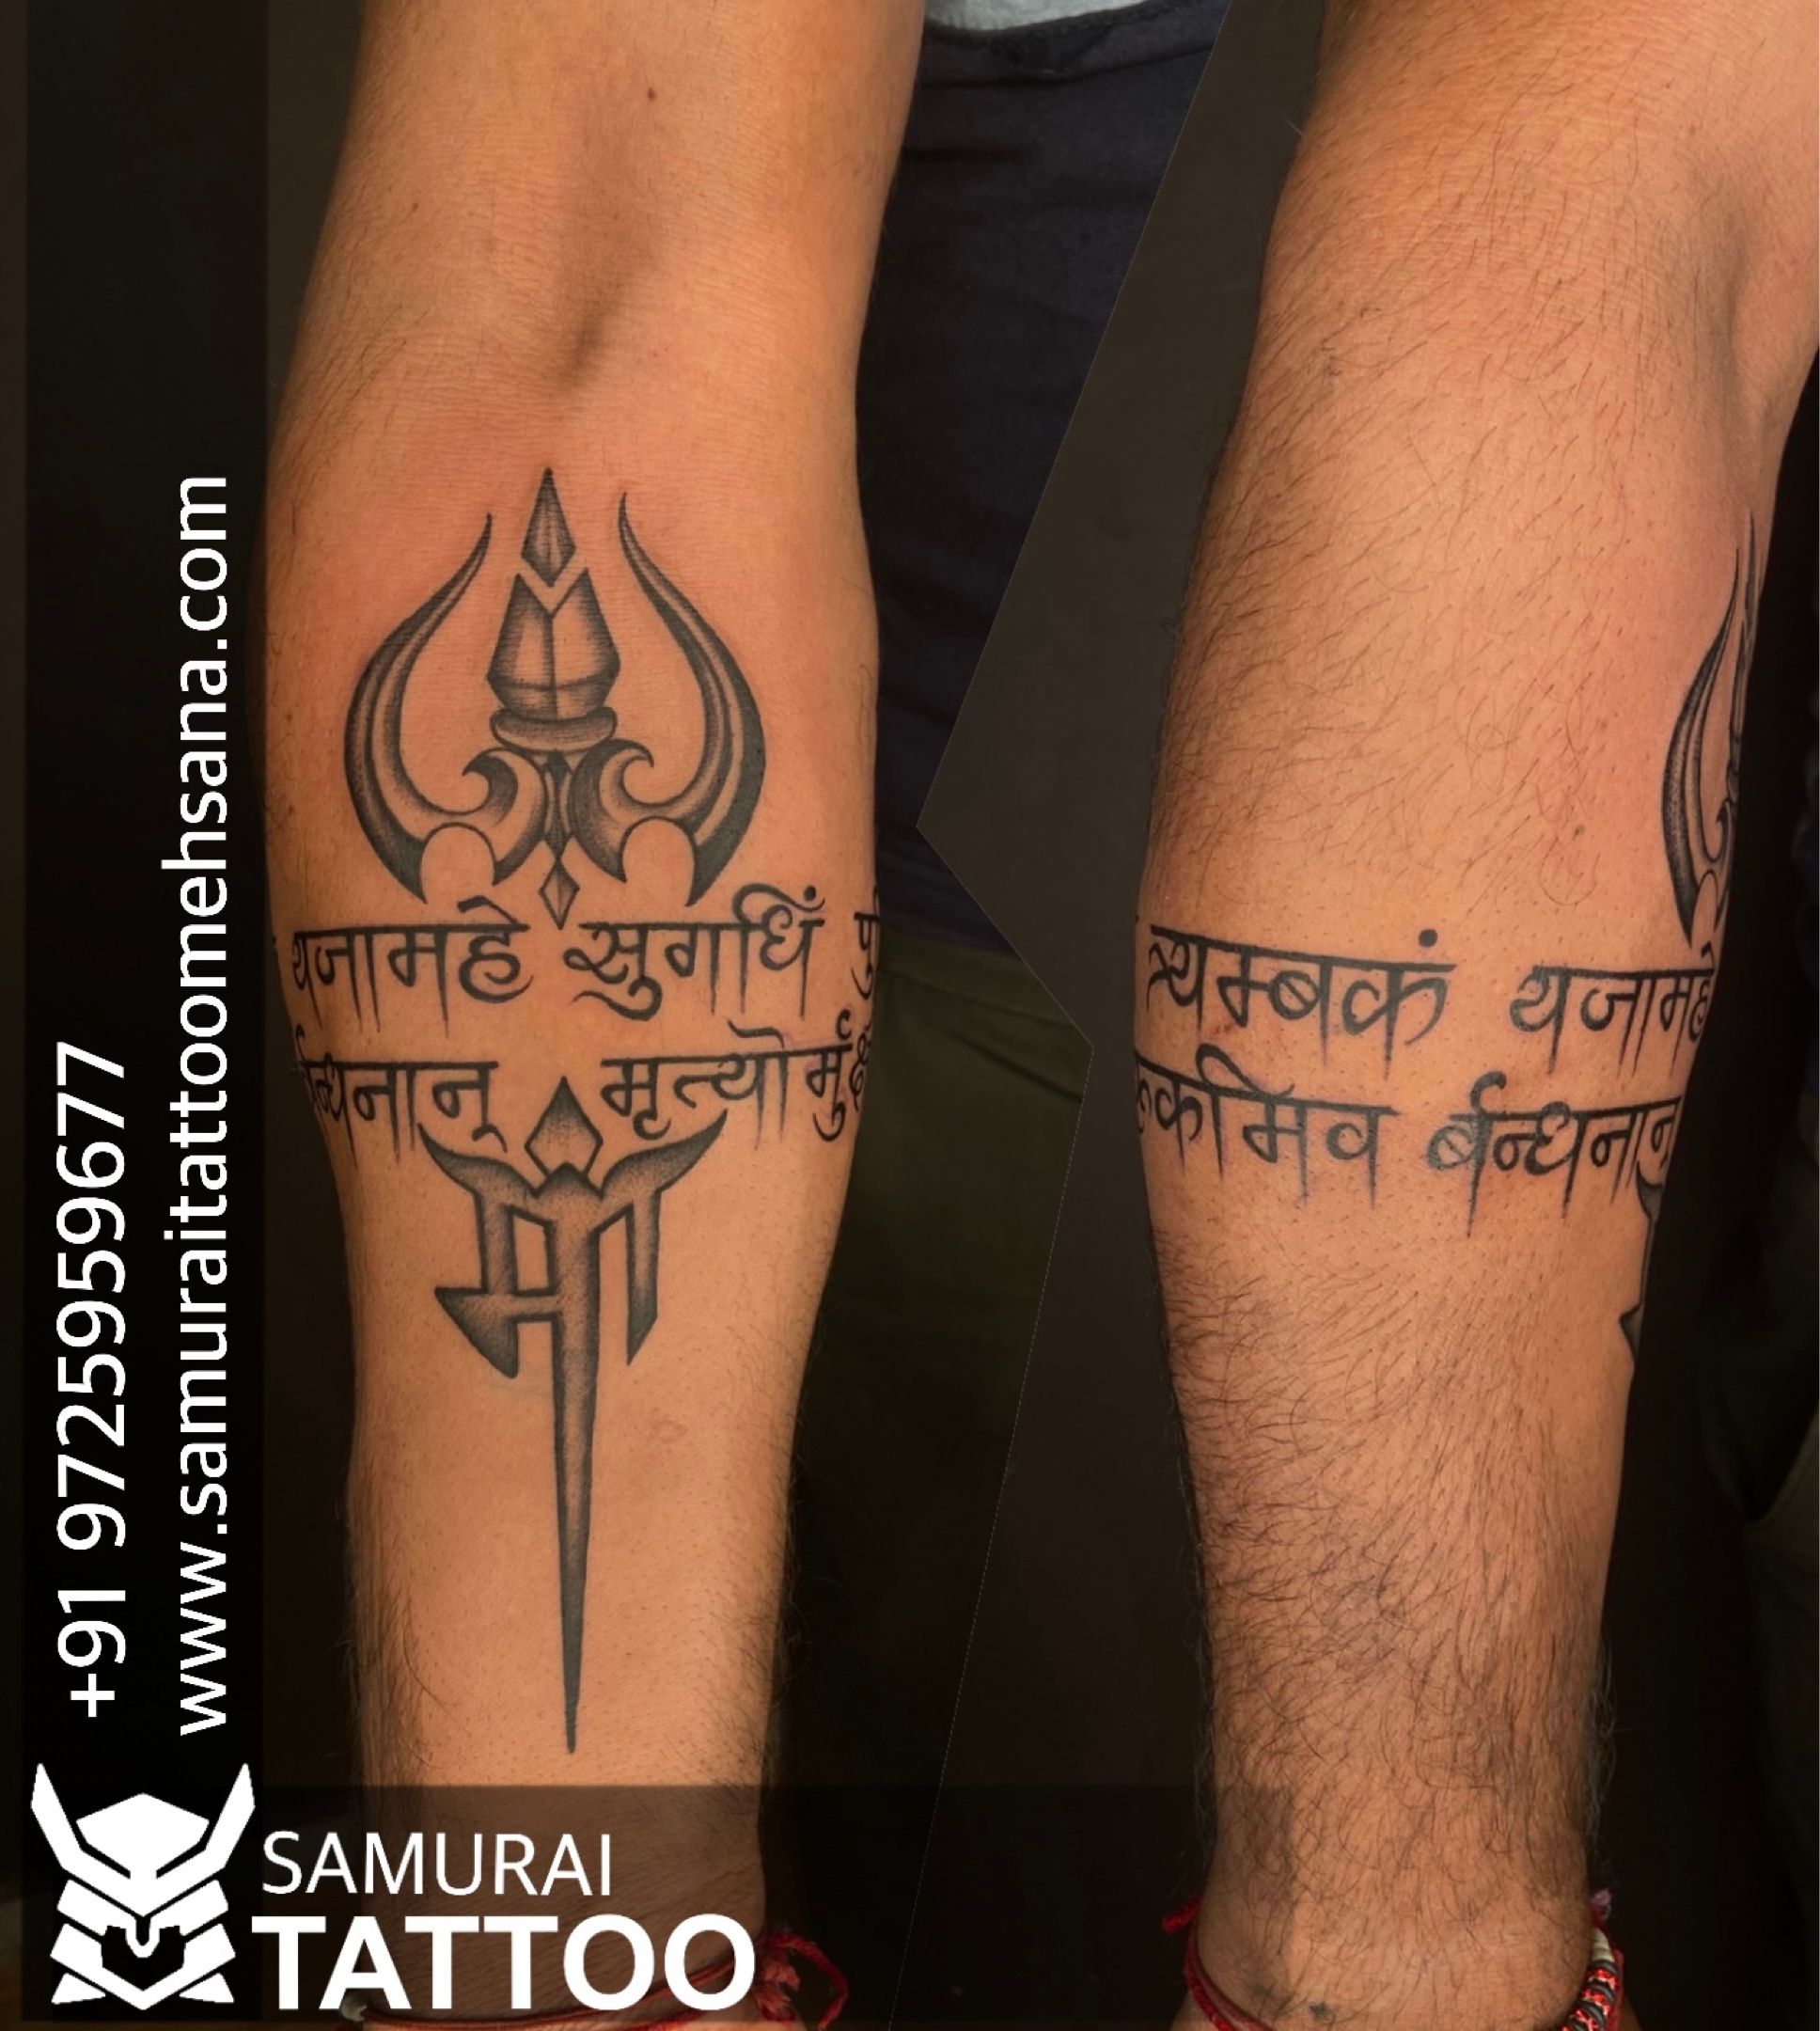 Ordershock Mahakal Waterproof Temporary Body Tattoo Buy Ordershock Mahakal  Waterproof Temporary Body Tattoo at Best Prices in India  Snapdeal